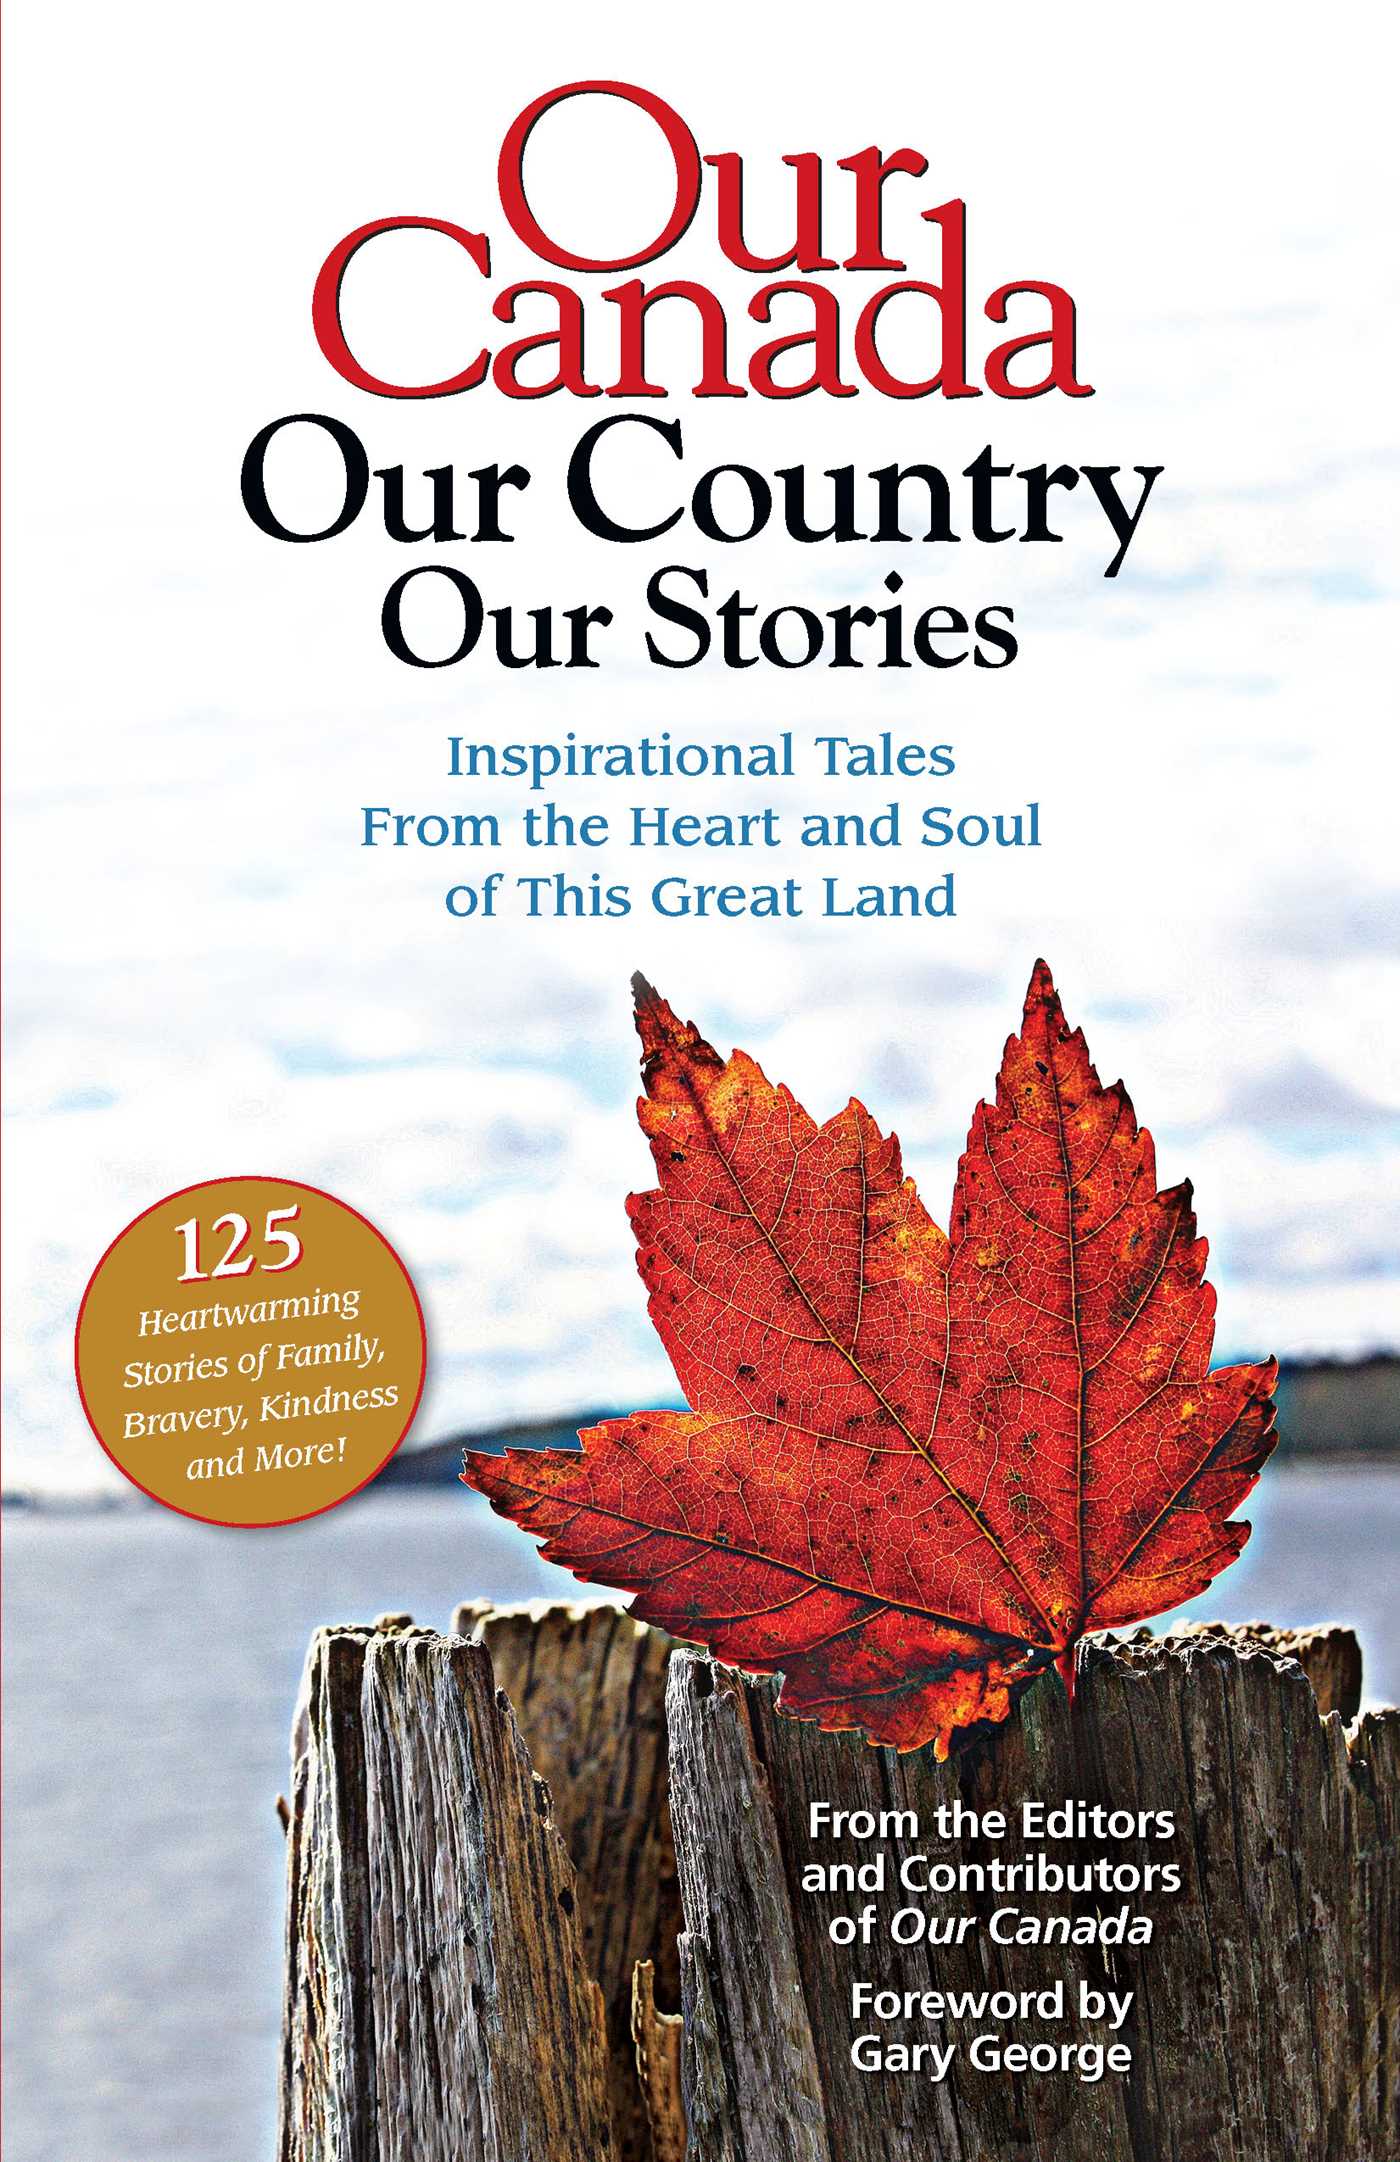 Our Canada Our Country Our Stories : Inspirational Tales from the Heart and Soul of this Great Land | Our Canada Magazine a Division of Reader's Digest